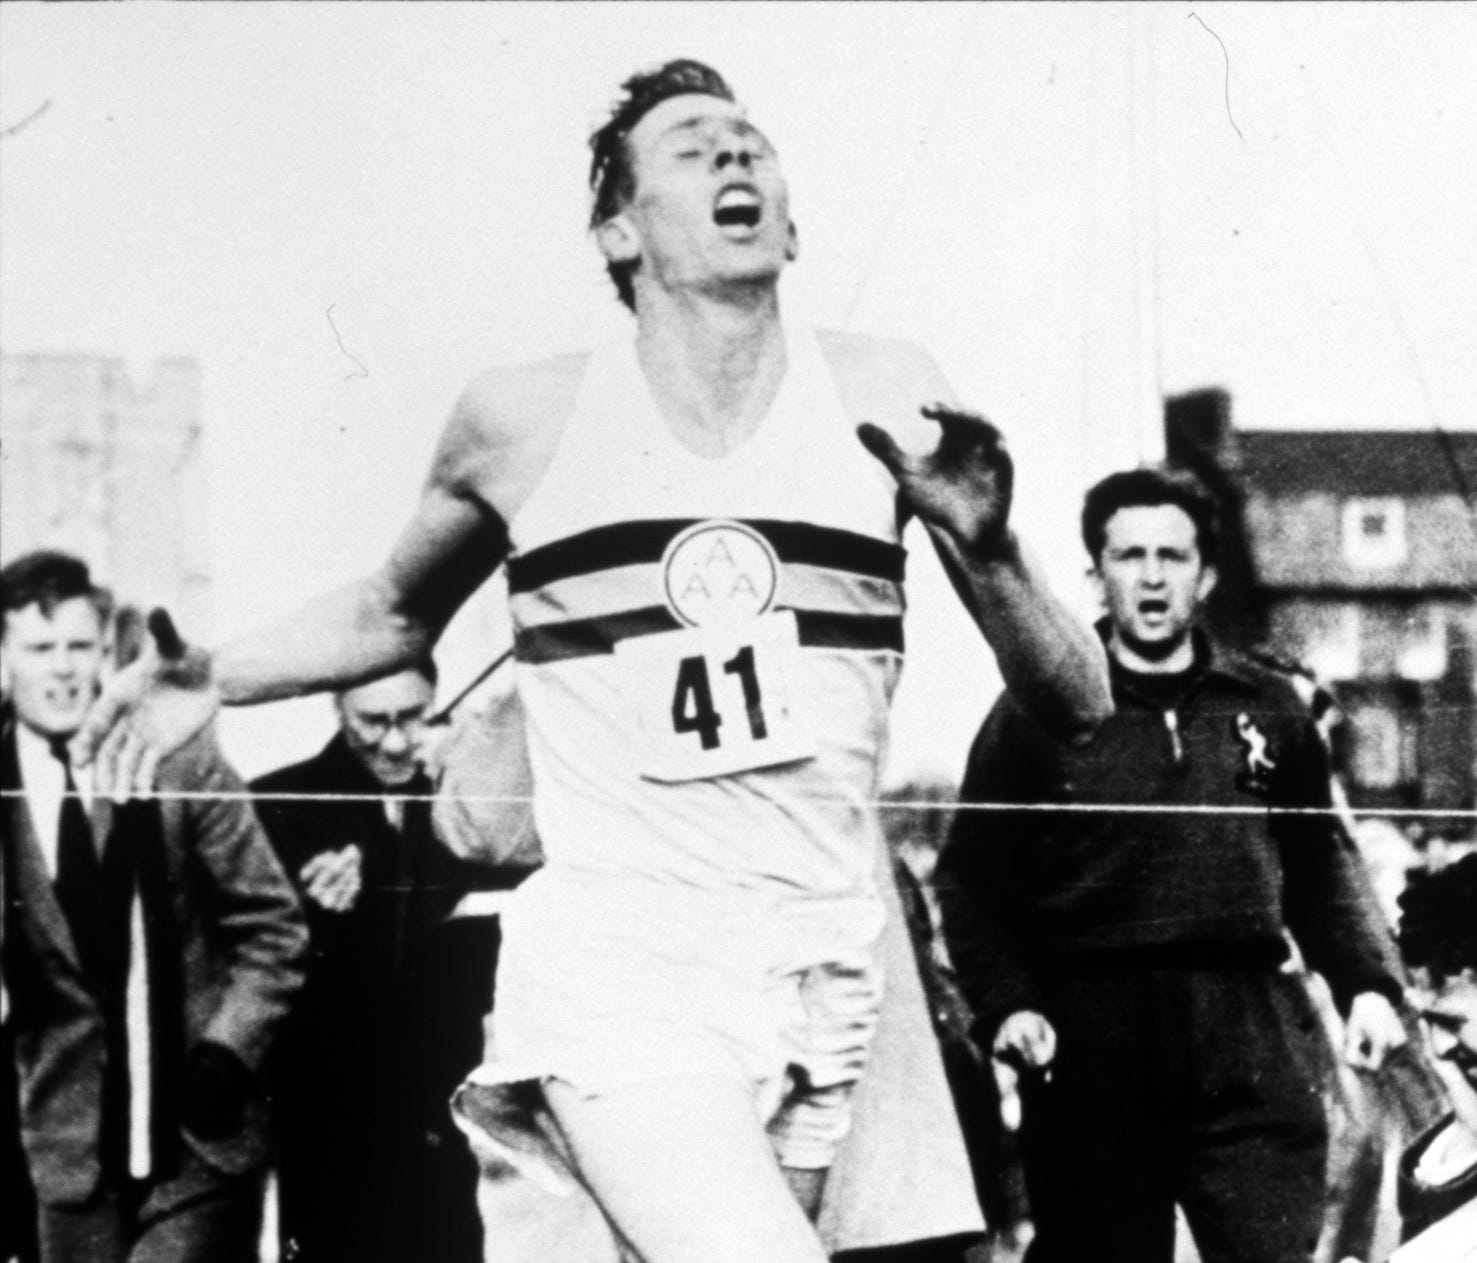 Roger Bannister breaks the 4-minute mile in 3 minutes, 59.4 seconds on May 6, 1954.